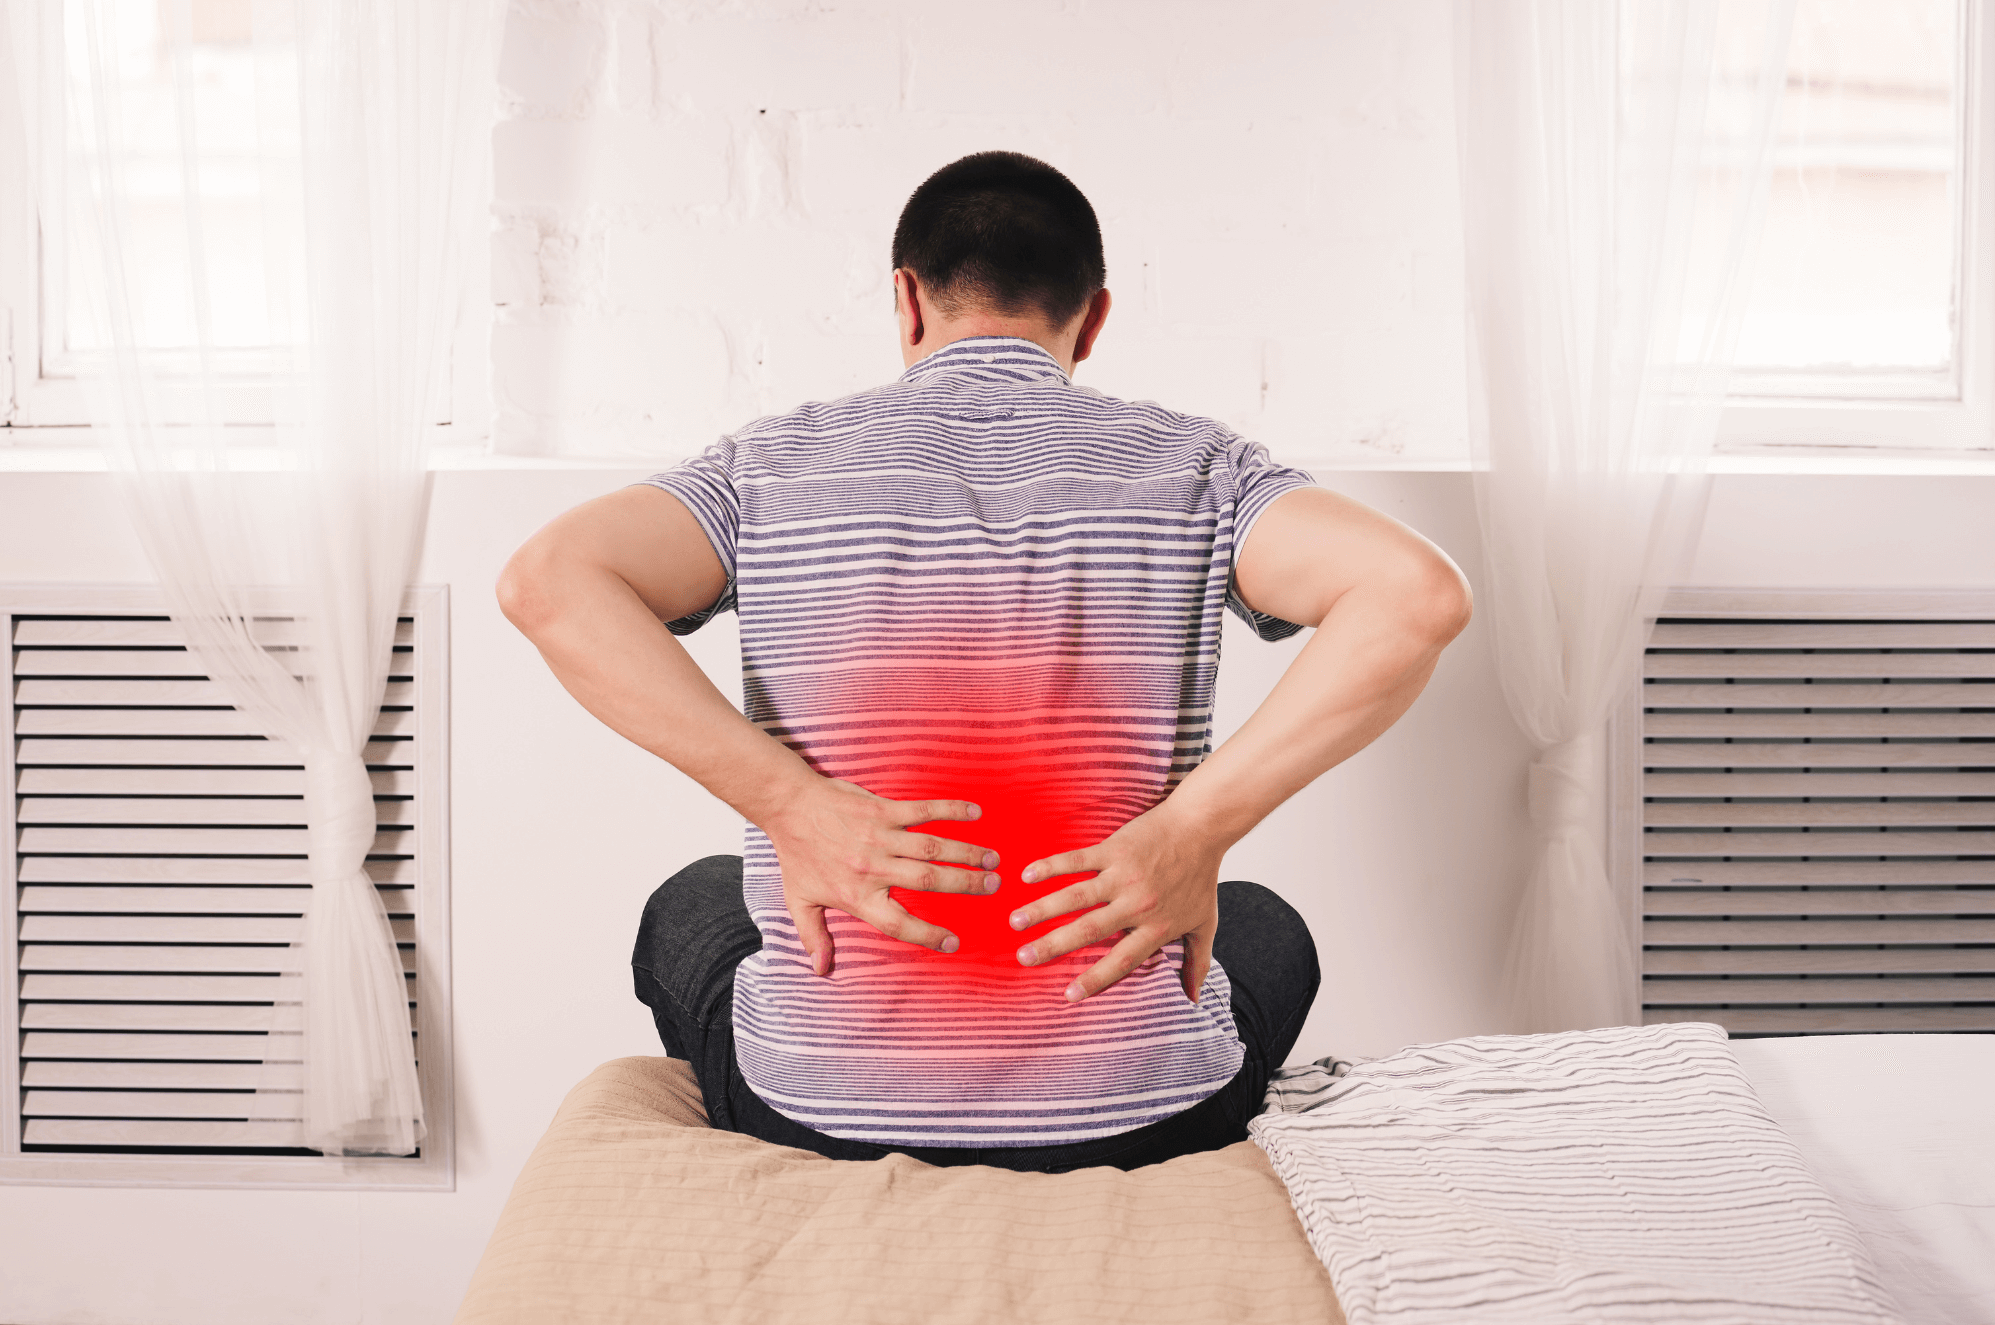 Get Rid of Sciatica Pain Without Surgery